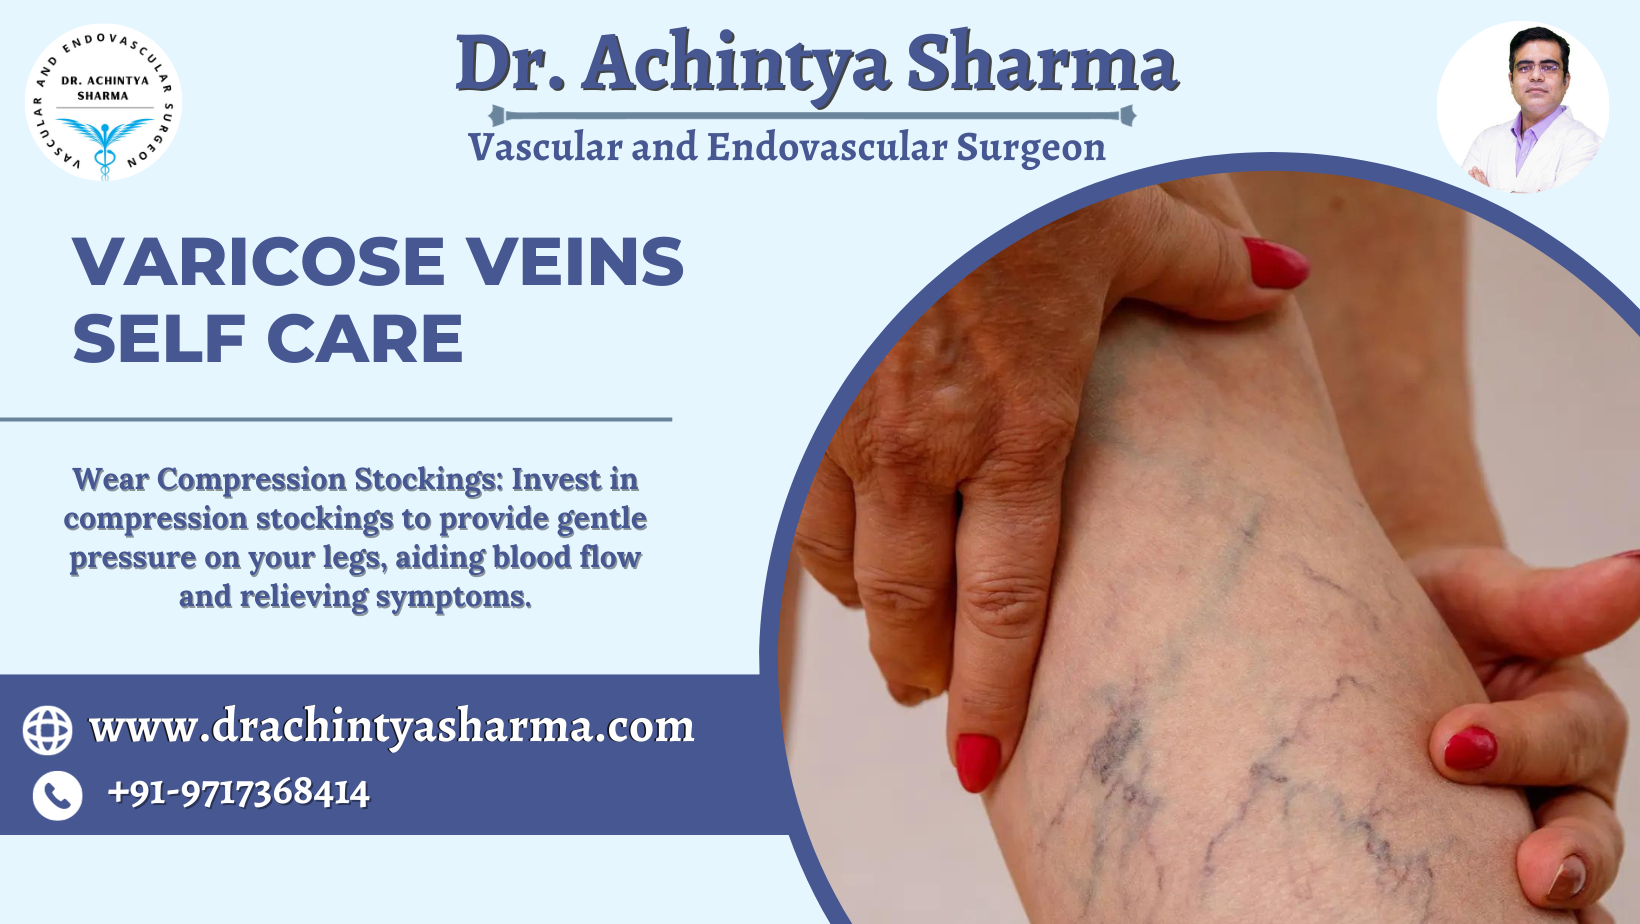  Exploring the Benefits of Varicose Vein Self-Care